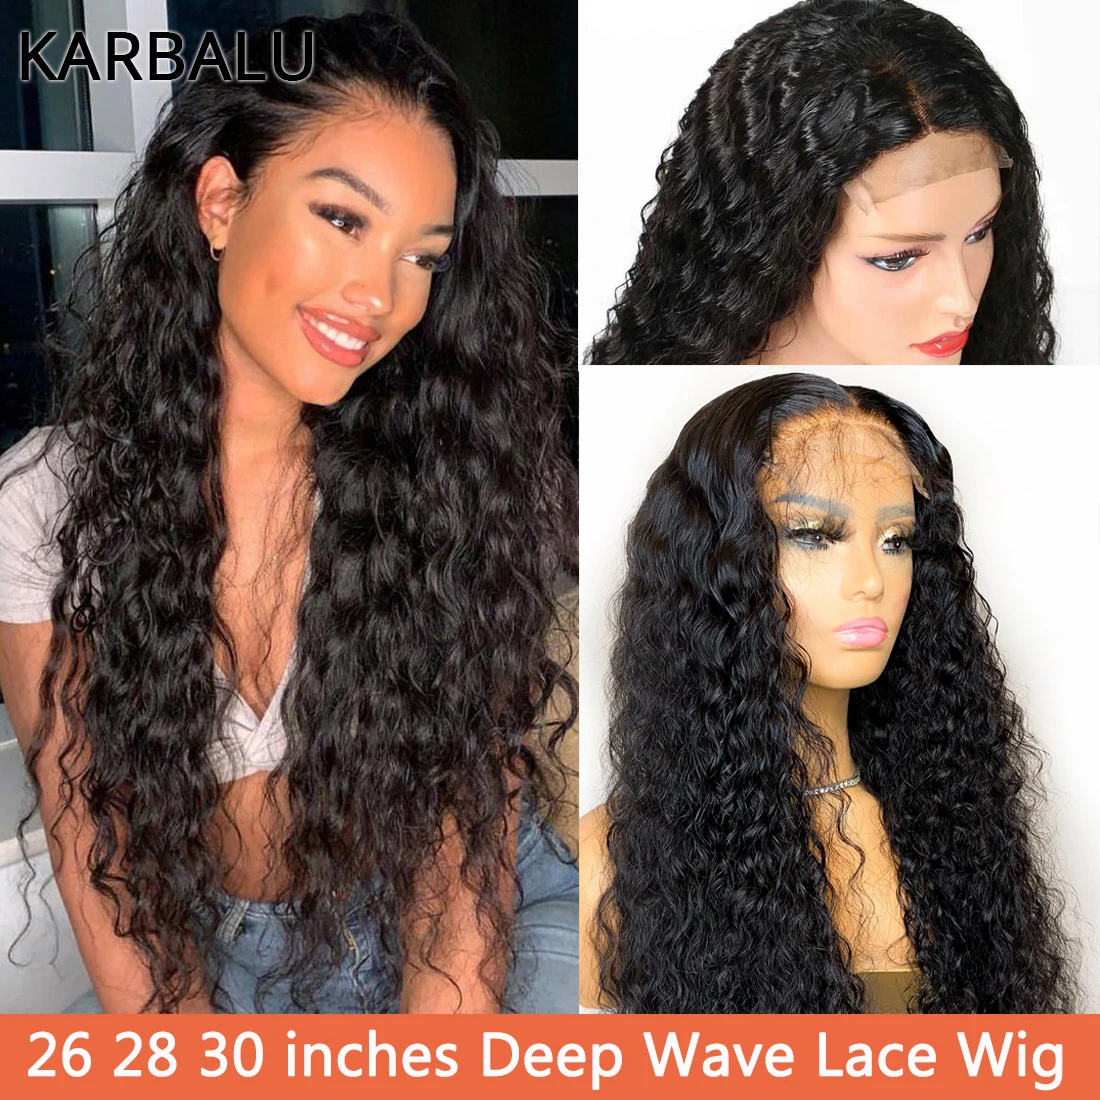 Karbalu Deep Wave Human Hair Wigs 13x4 Lace Front Wigs 10-30 Inch Transparent Pre Plucked Lace Frontal Wigs 4x4 Closure Wig 180%